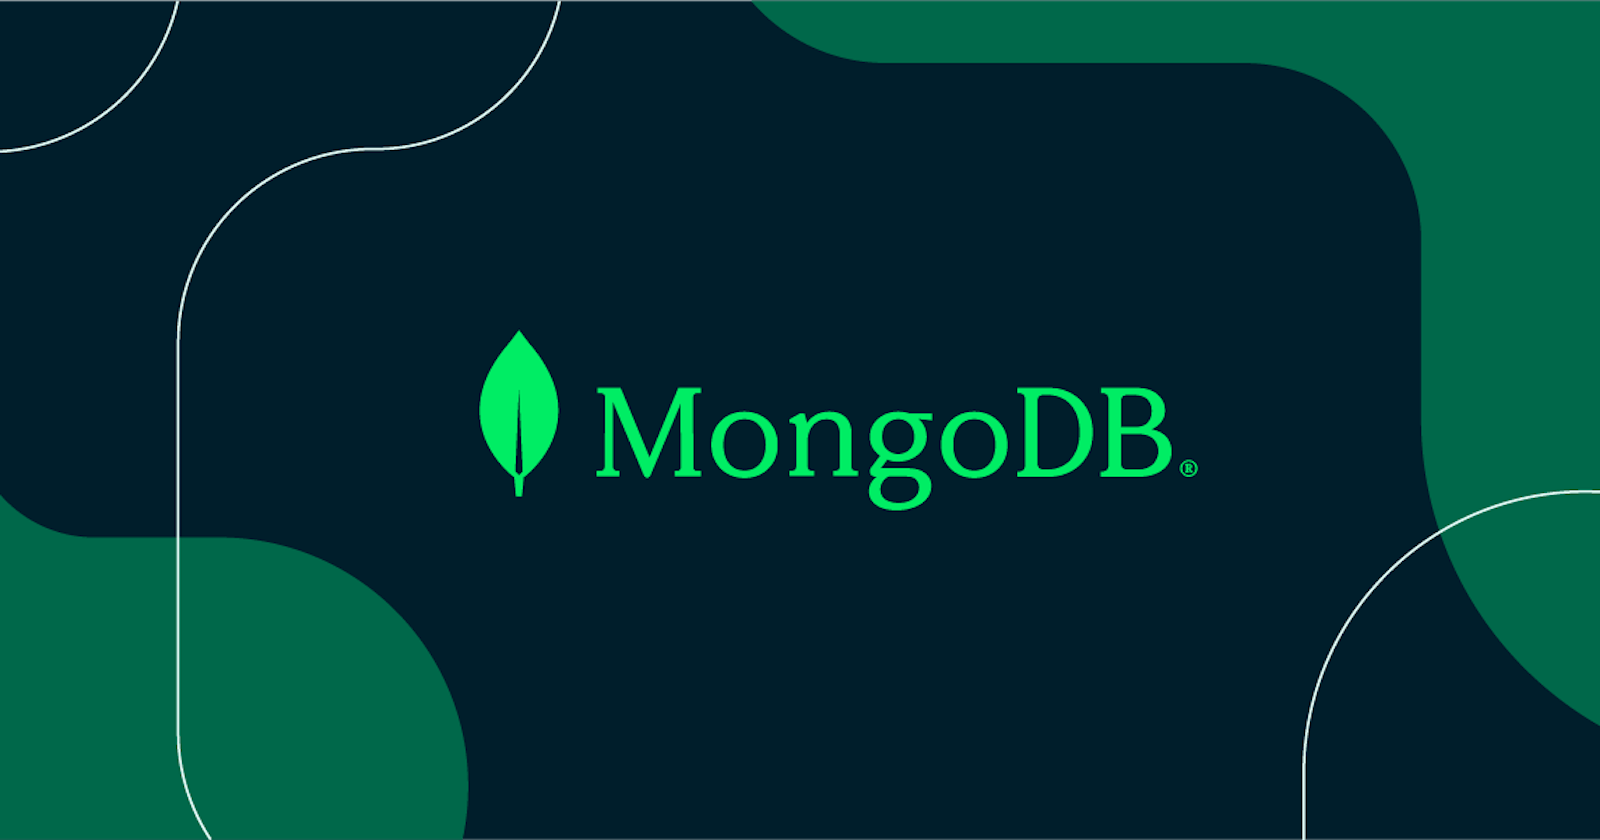 Migrating from Self-managed MongoDB to Atlas MongoDB with no downtime.